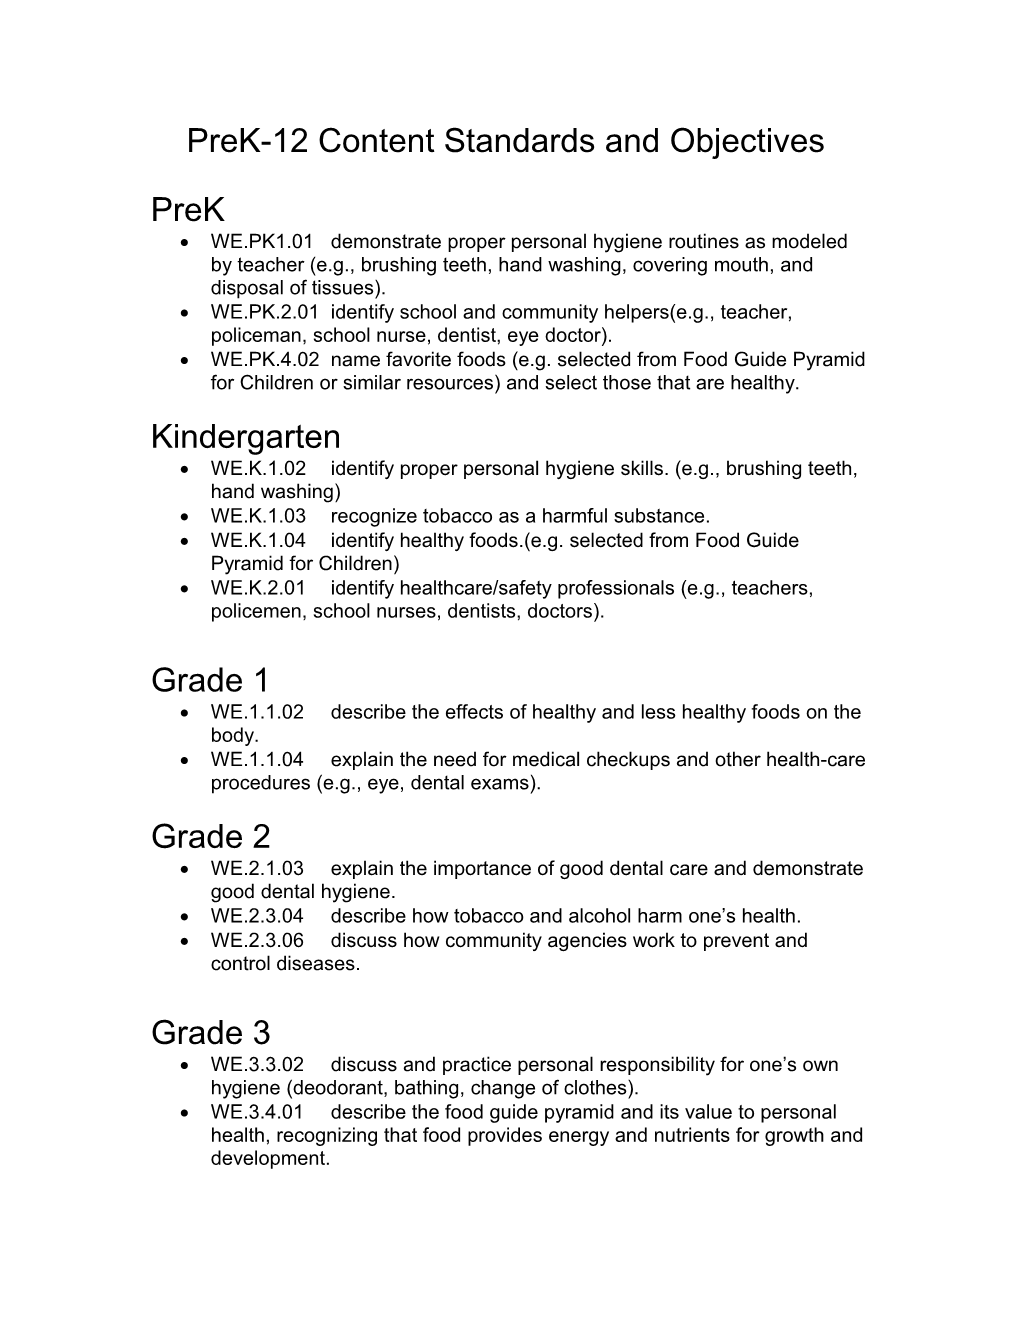 Prek-12 Content Standards and Objectives